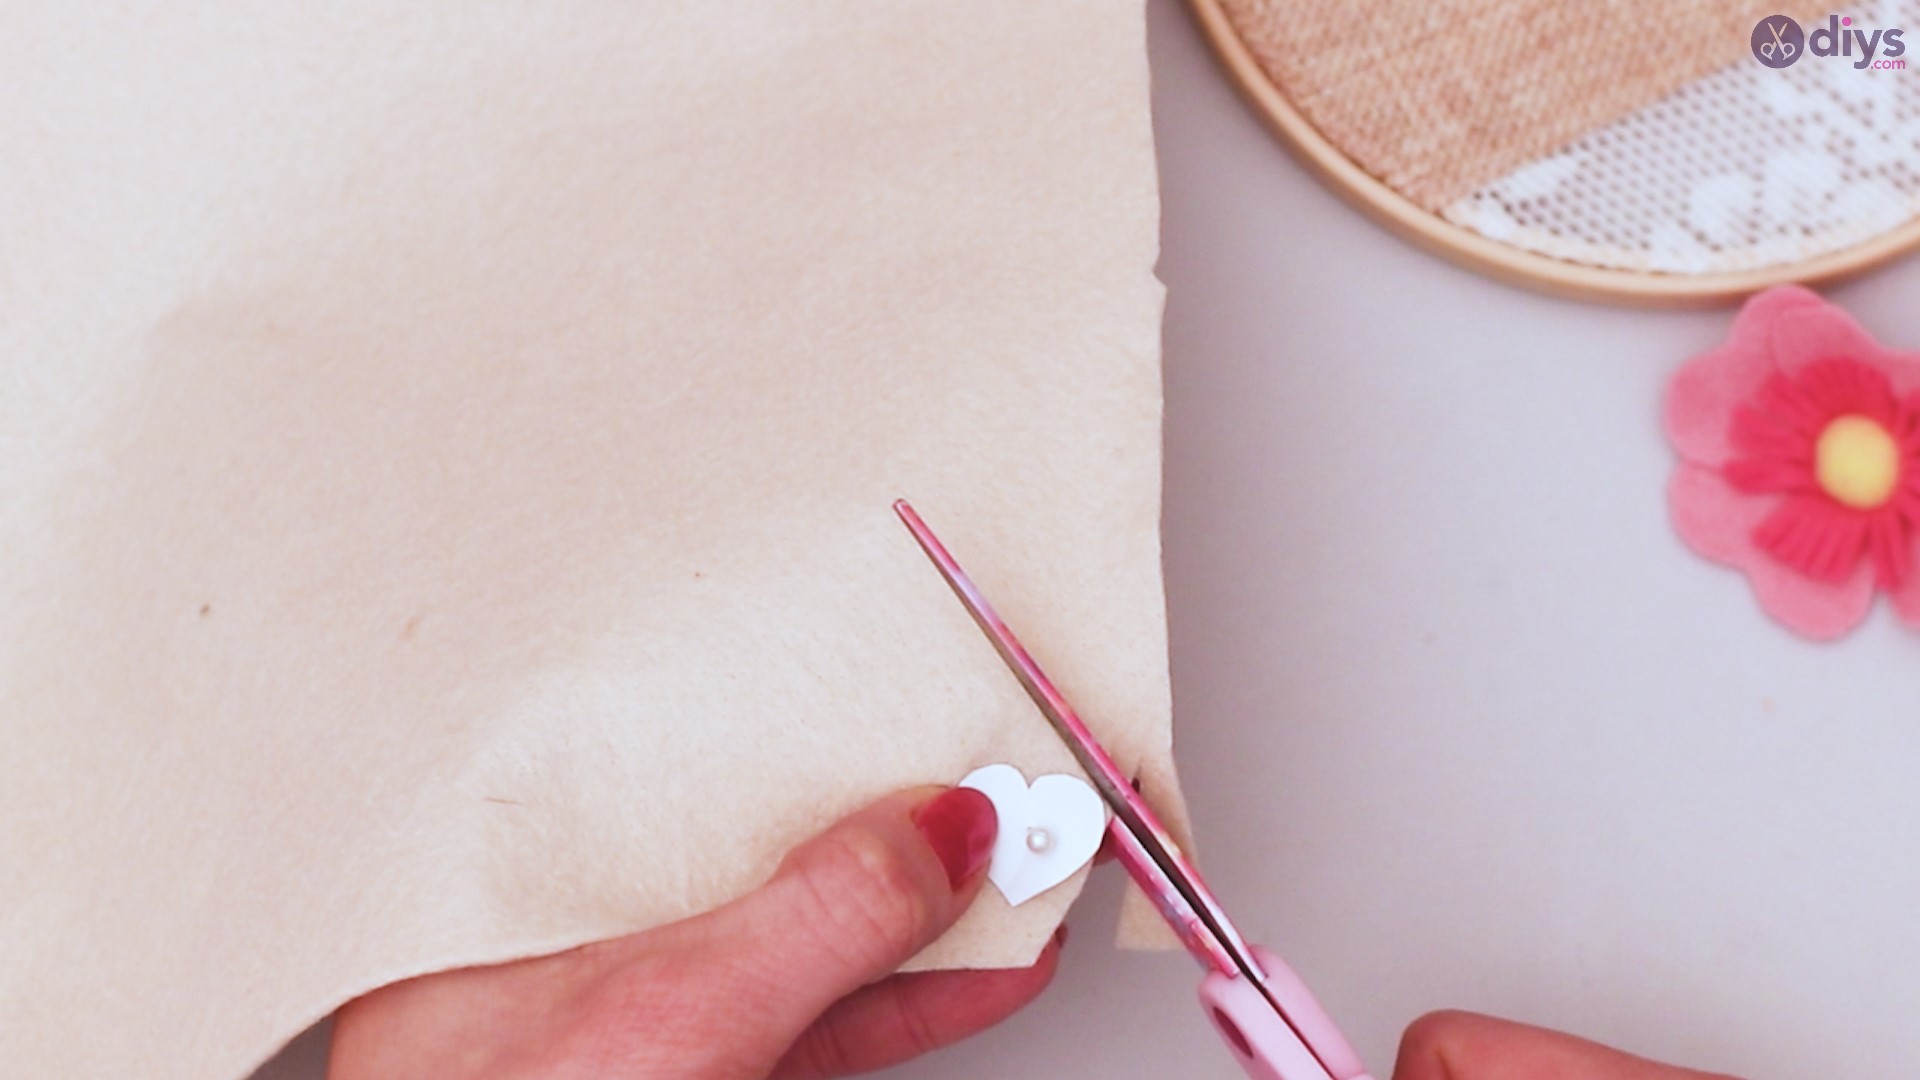 Diy embroidery hoop wall decor tutorial step by step (34)